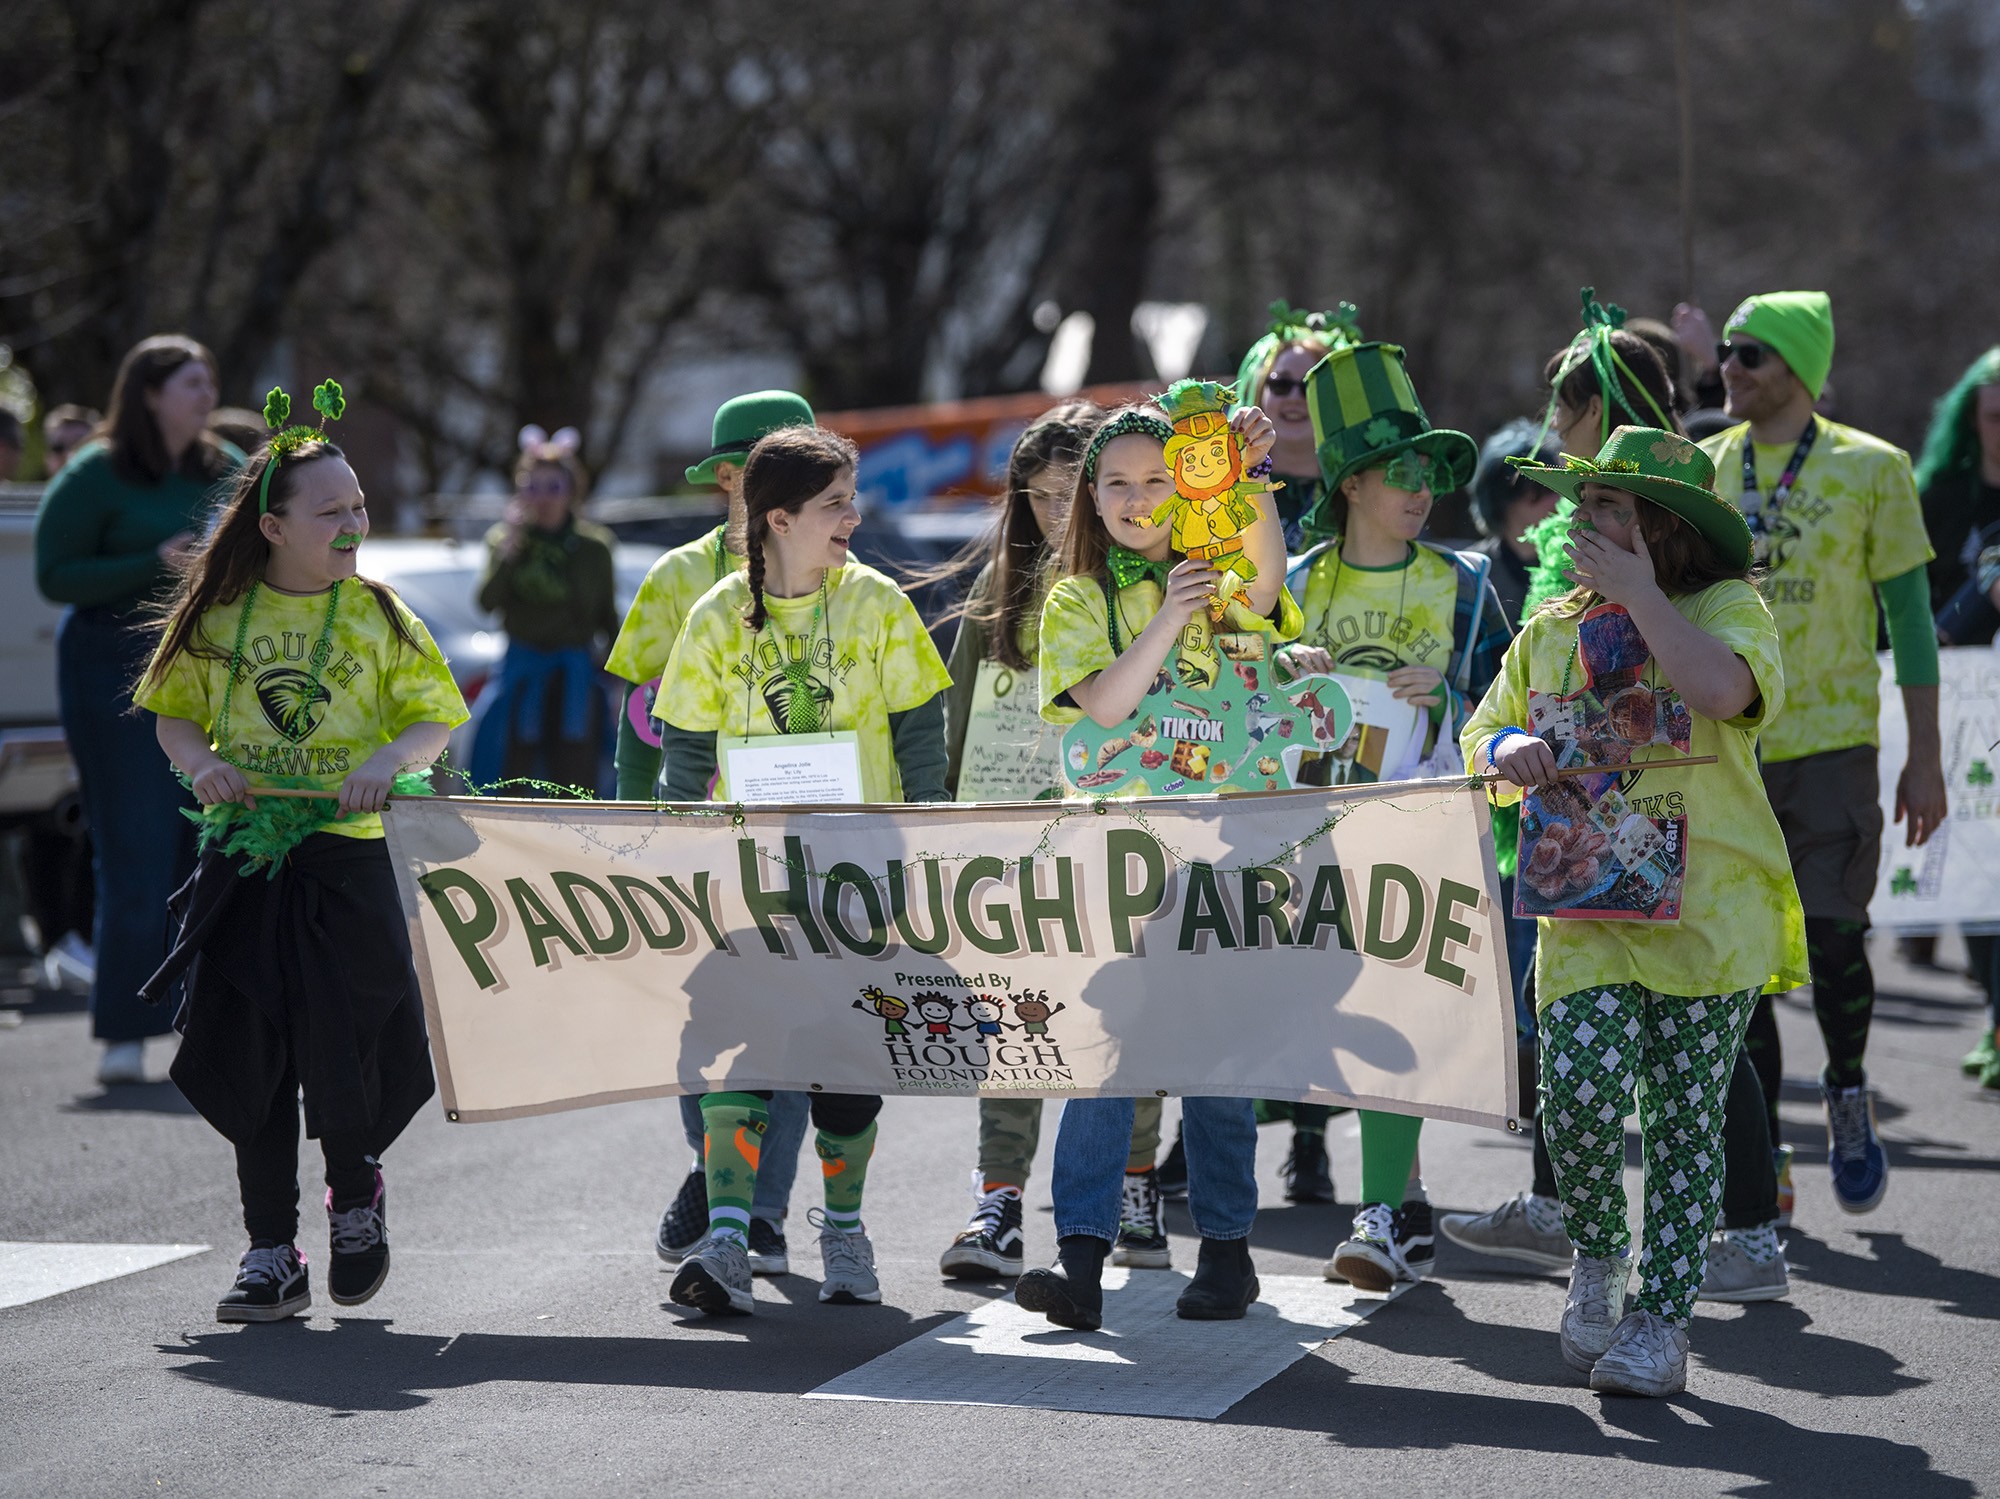 Hough Elementary students march and hold a banner Friday, March 17, 2023, during the Paddy Hough Parade in Vancouver.